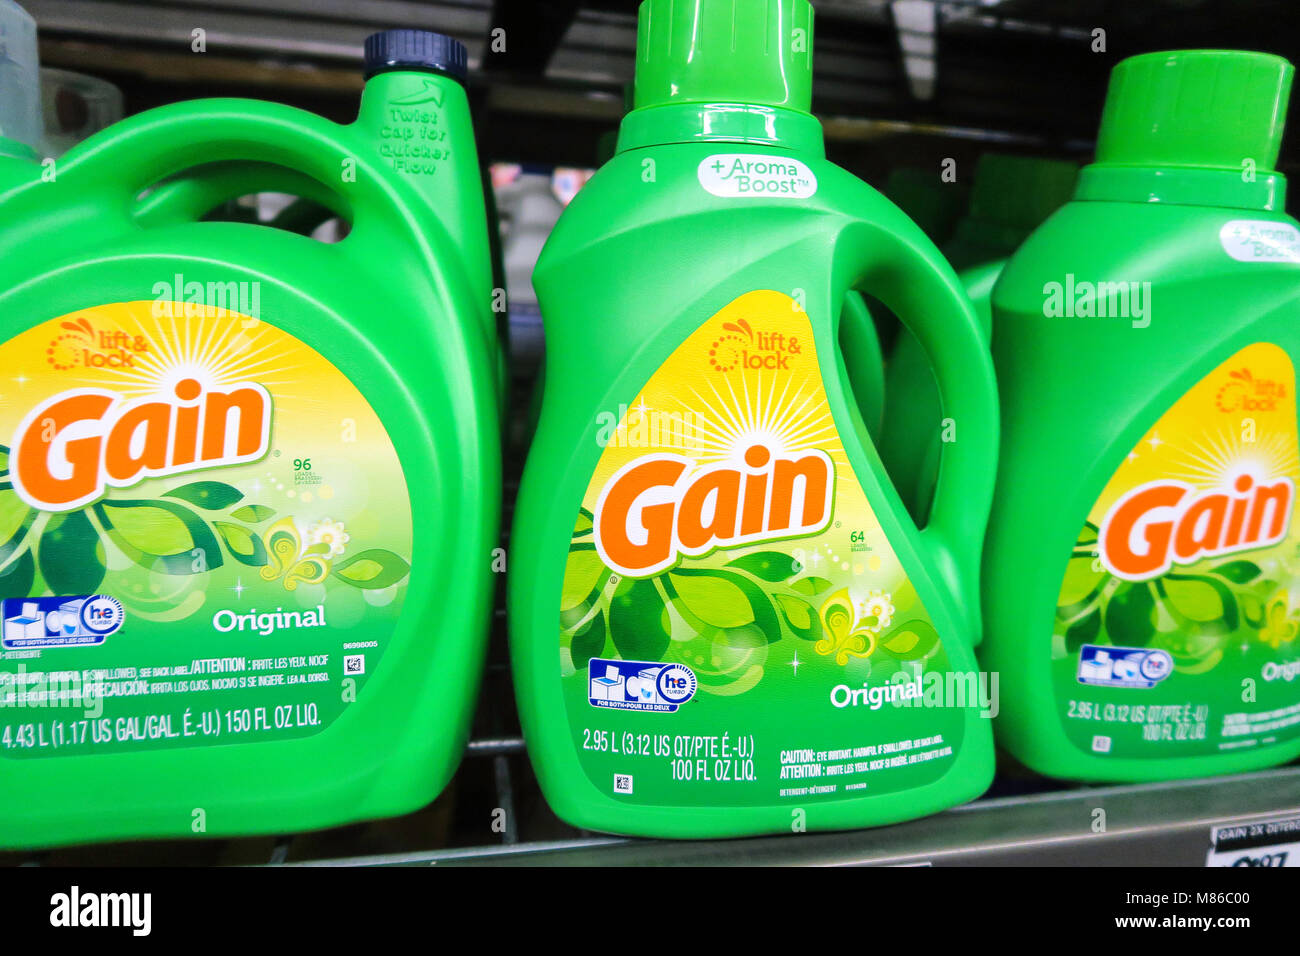 Home Depot Cleaning Products Store Display, NYC Stock Photo